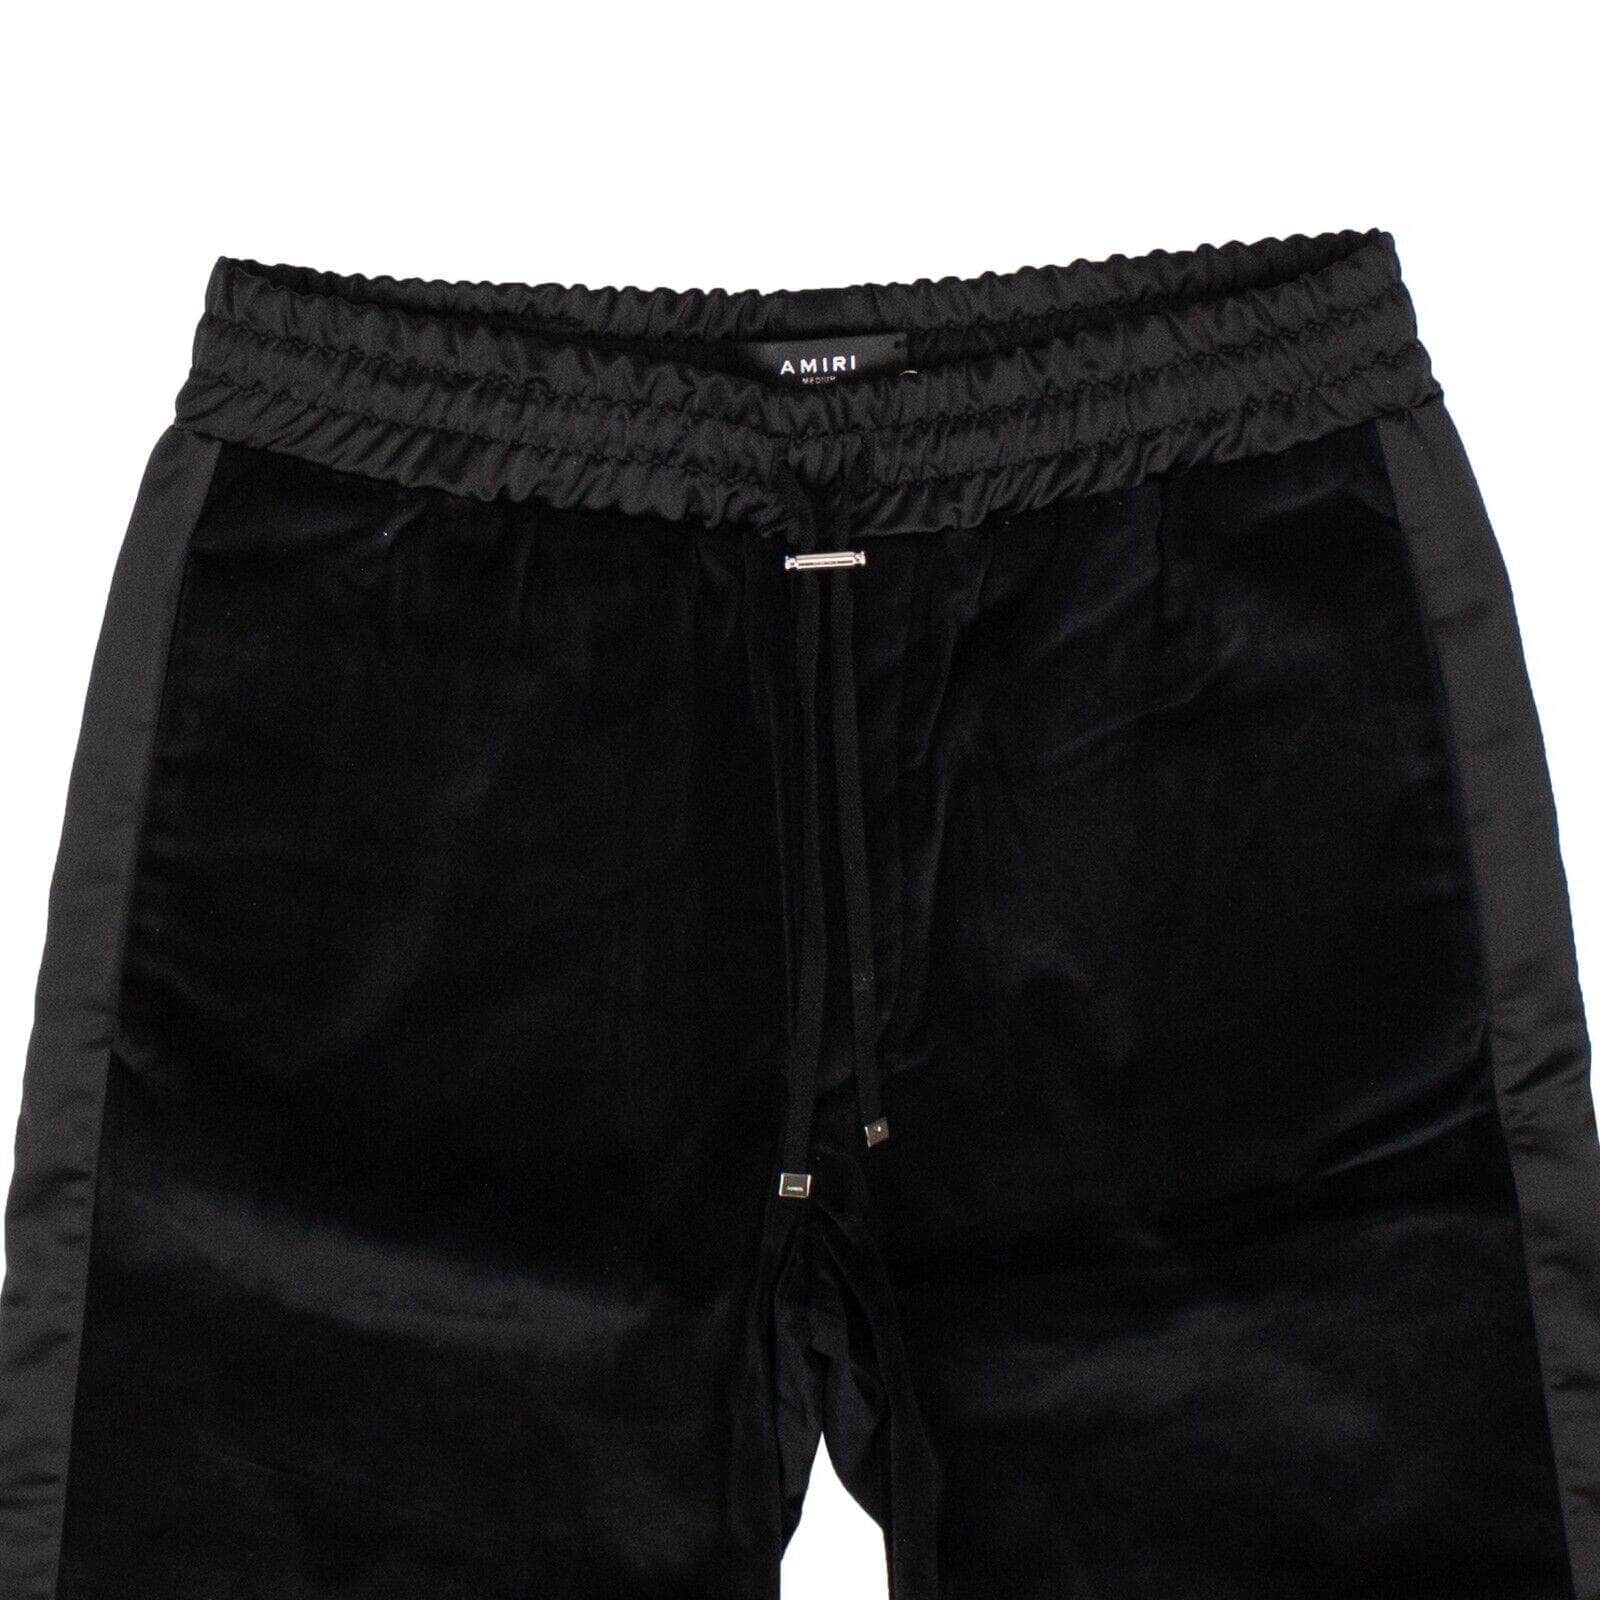 Amiri 500-750, amiri, channelenable-all, chicmi, couponcollection, gender-mens, main-clothing, mens-shoes, size-m M Black Velvet Satin Shorts 95-AMR-1044/M 95-AMR-1044/M